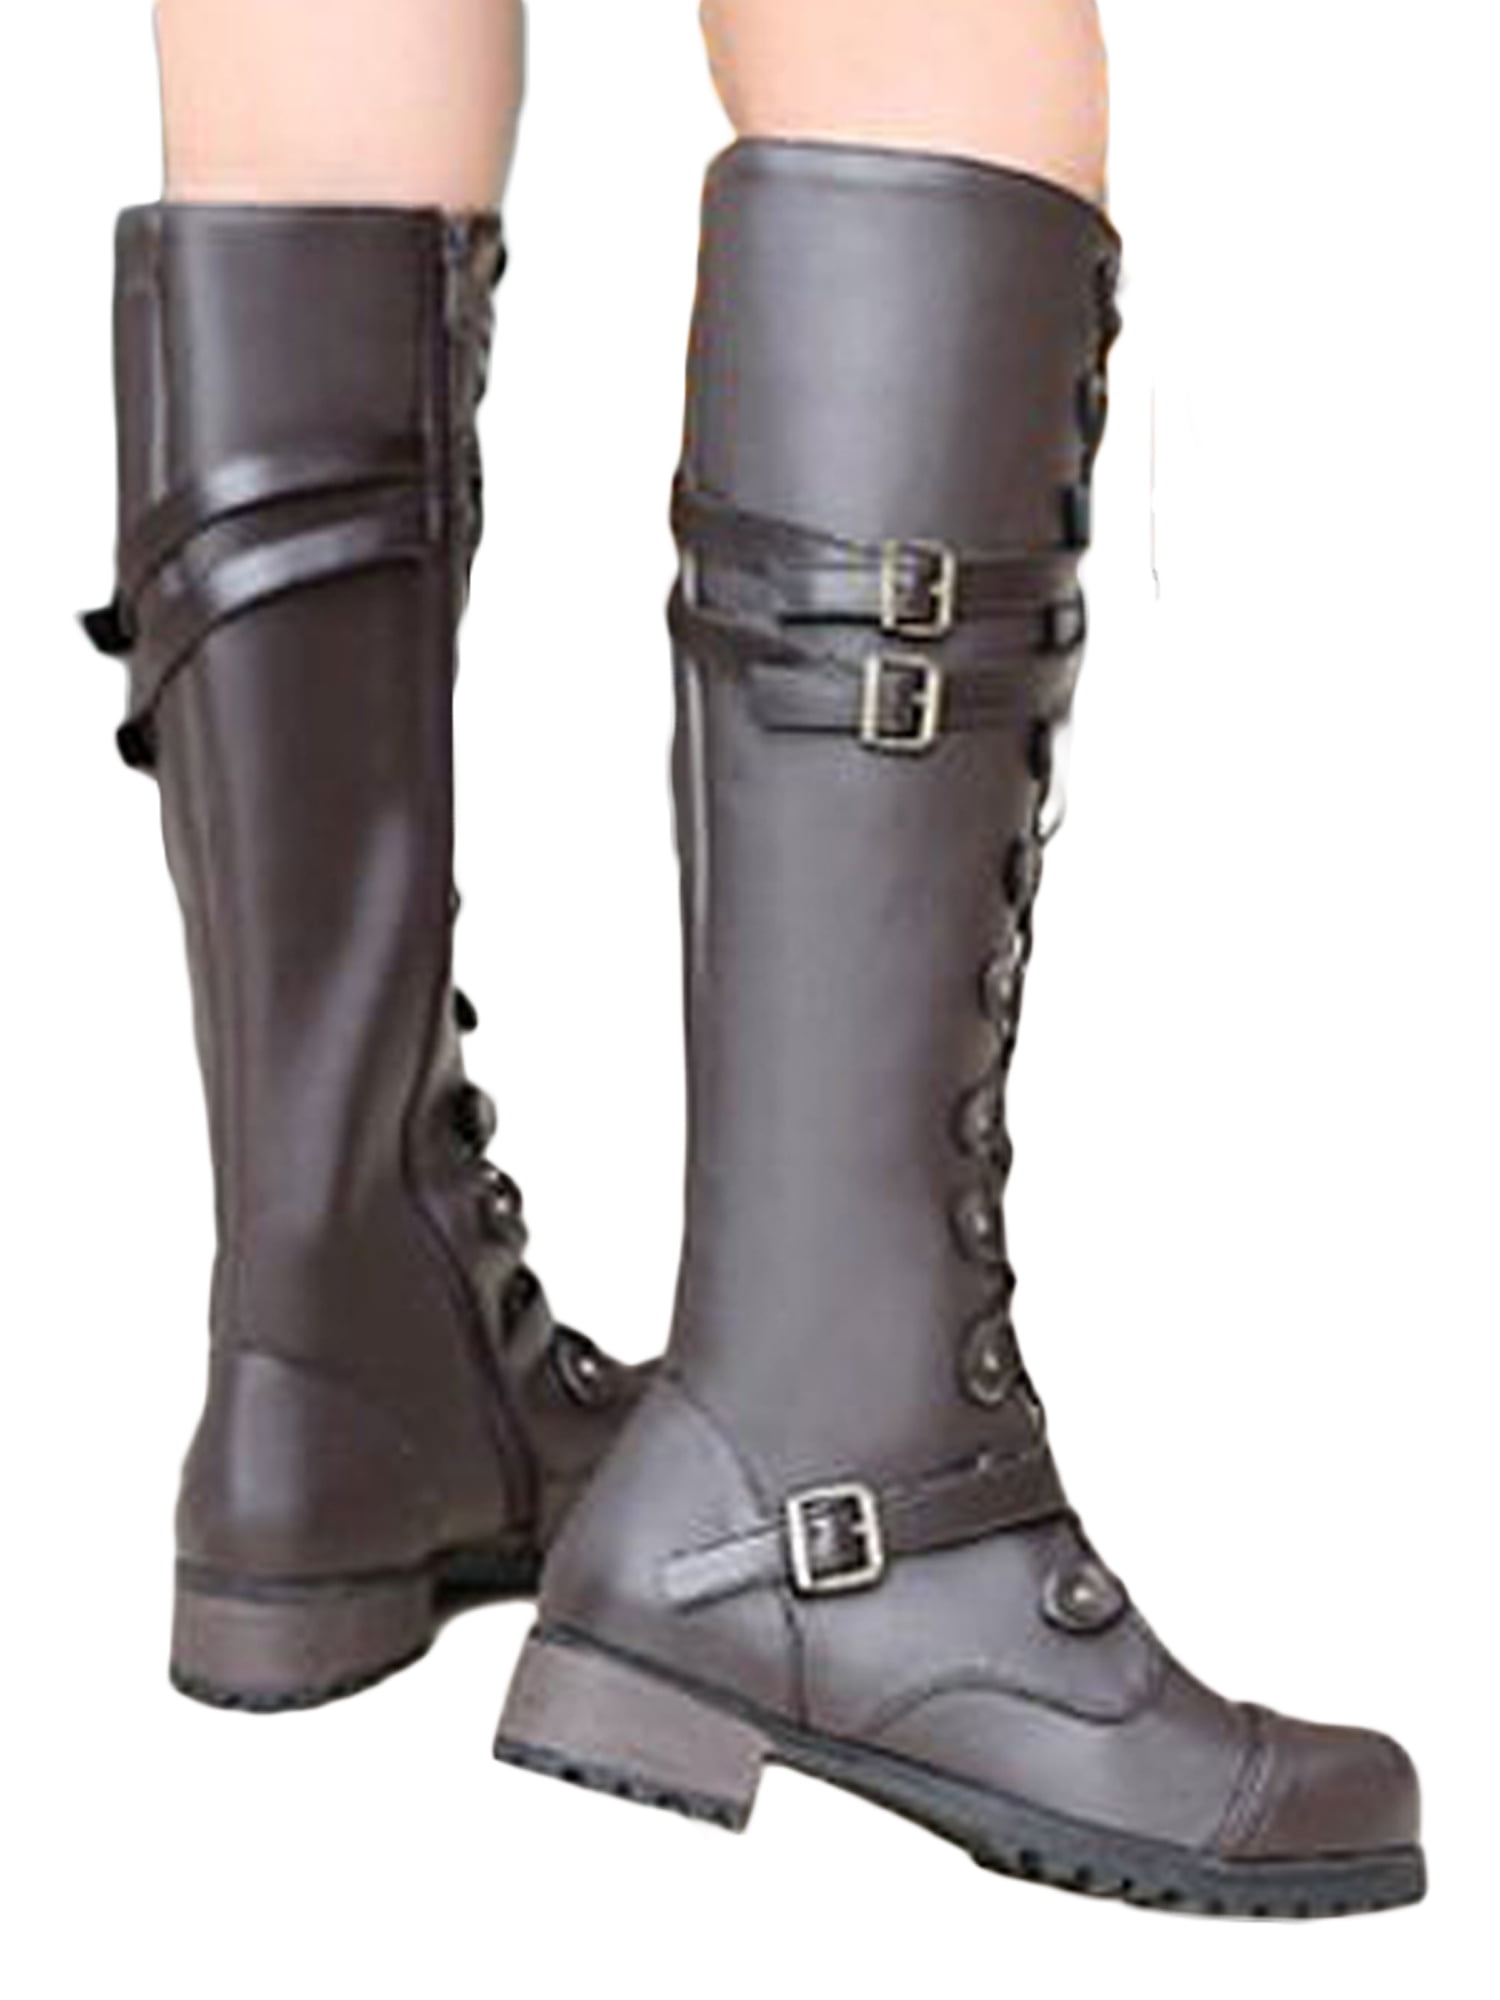 Women's Over Knee High knight Boots Casual Faux Leather Pull On Riding Shoes new